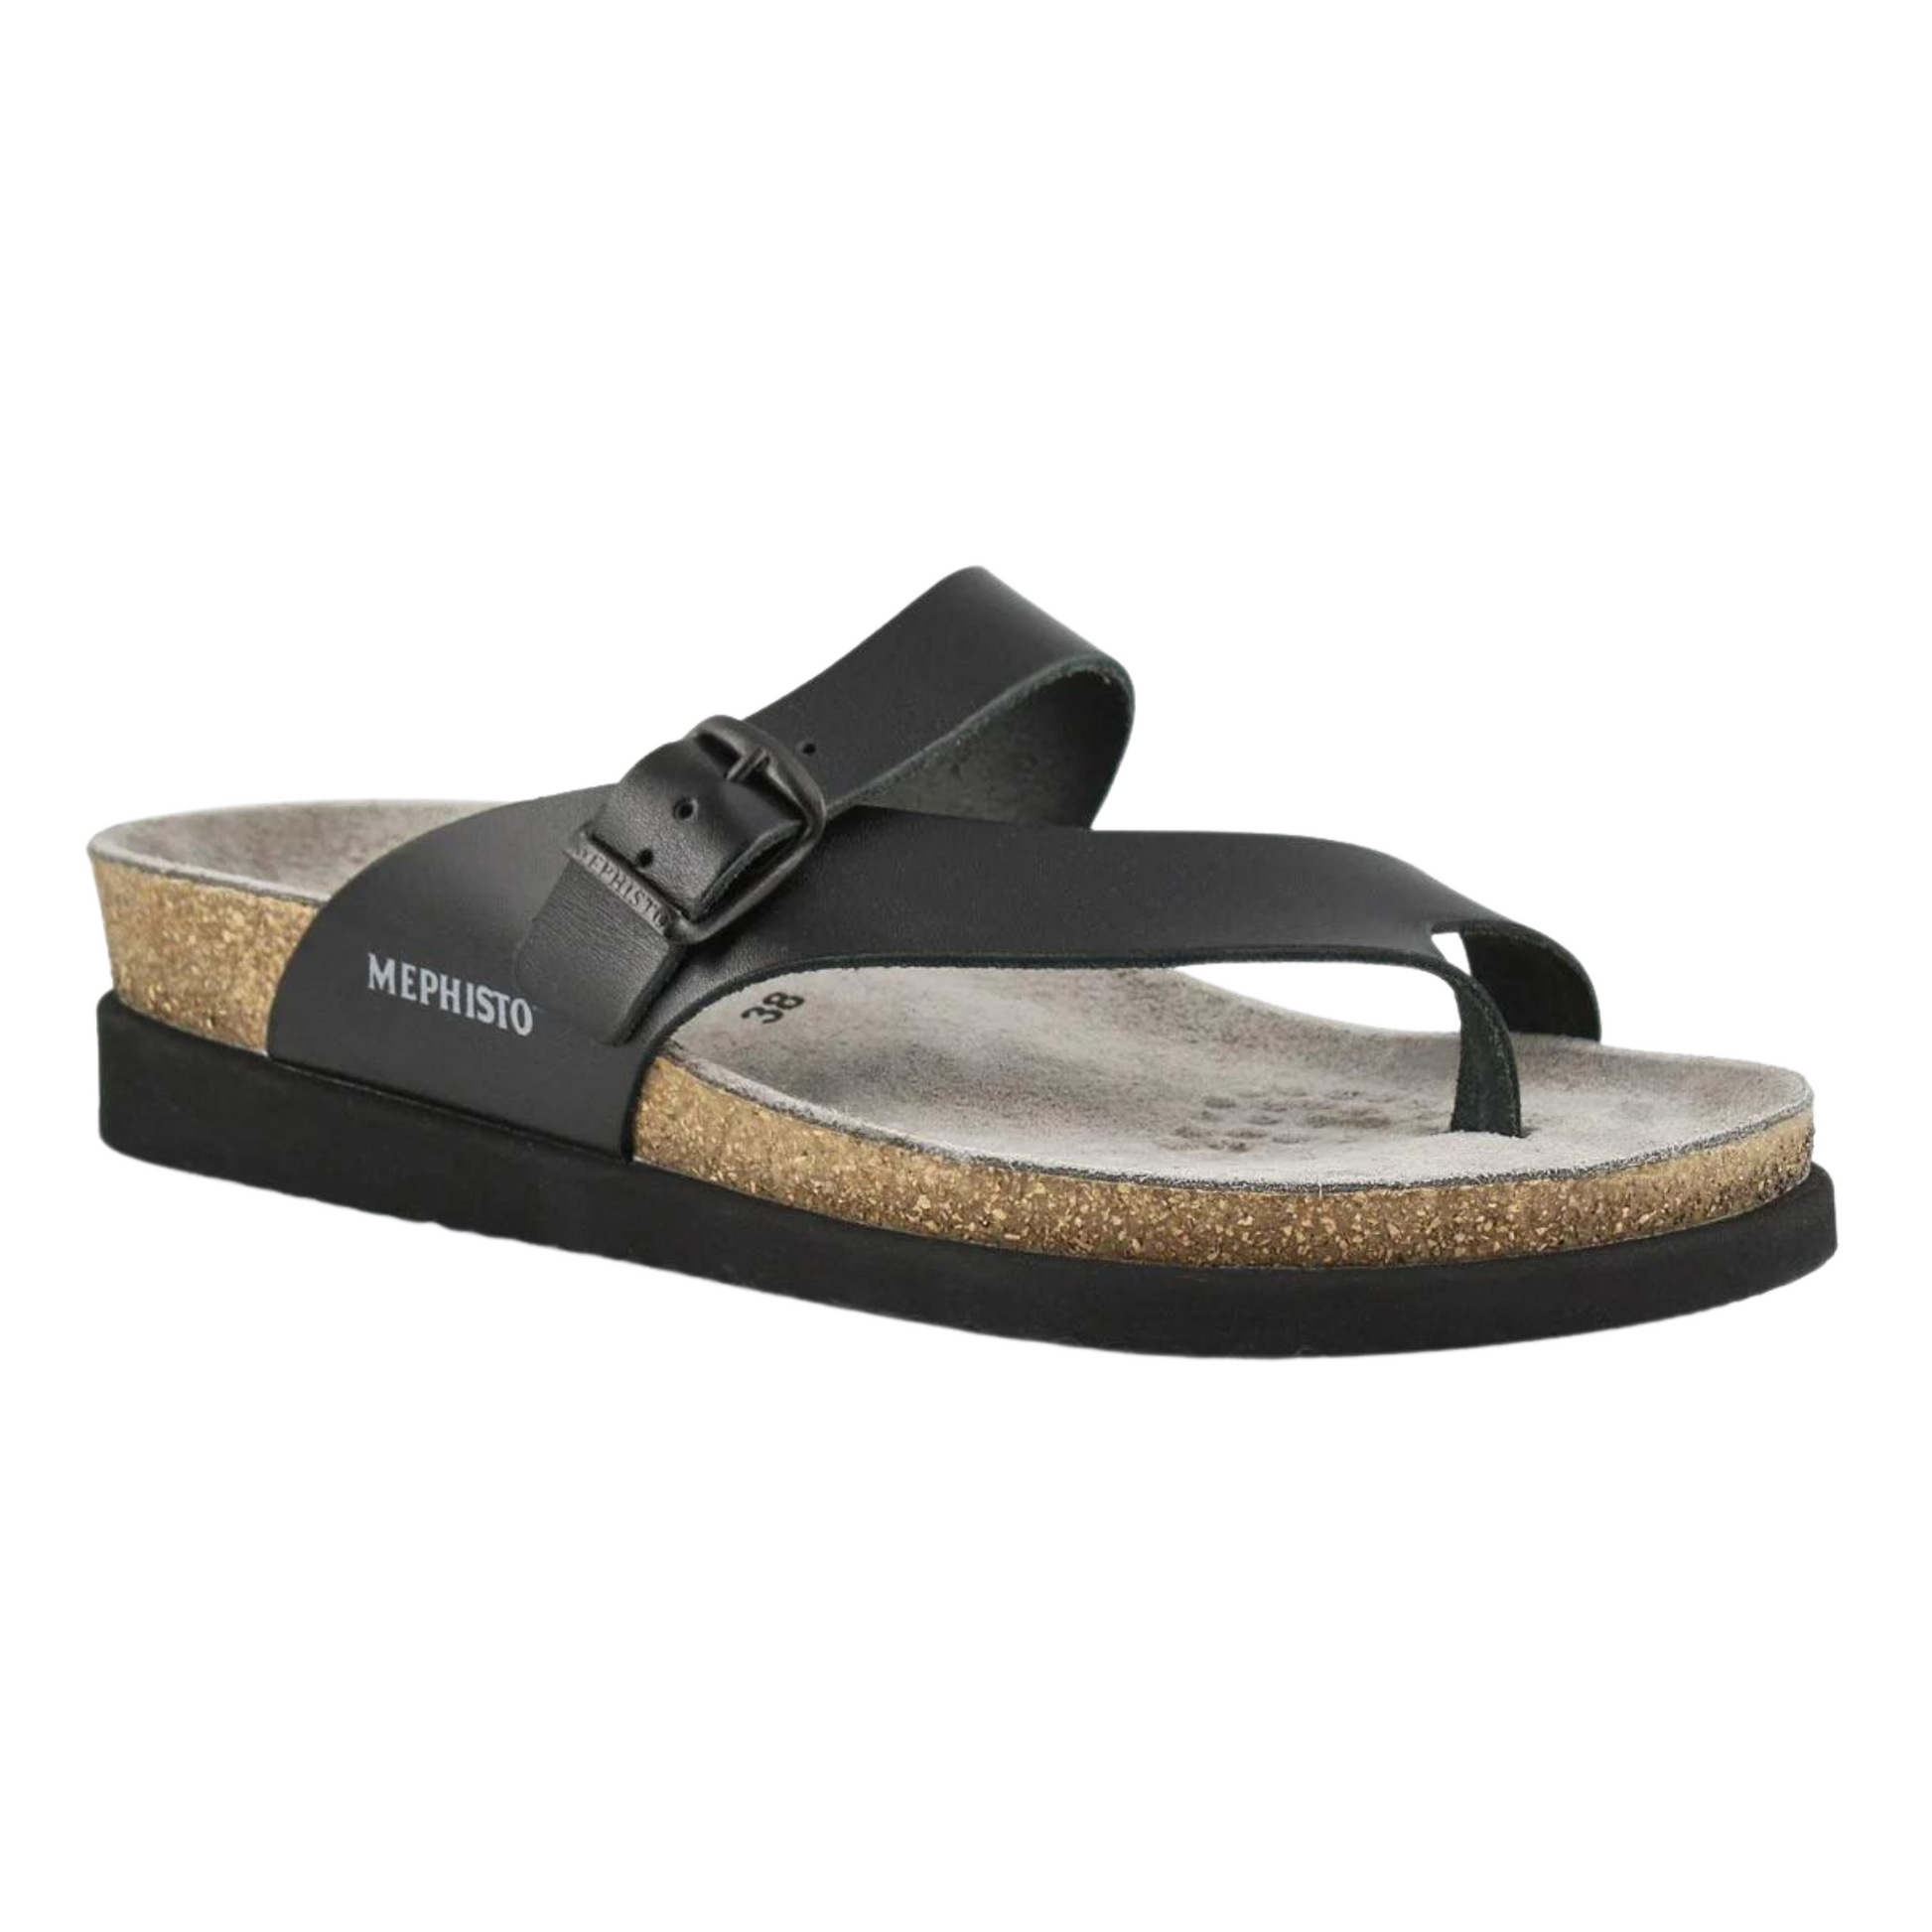 A right angle view of a cork sandal with a black leather strap and toe loop, with a black buckle and grey suede footbed.